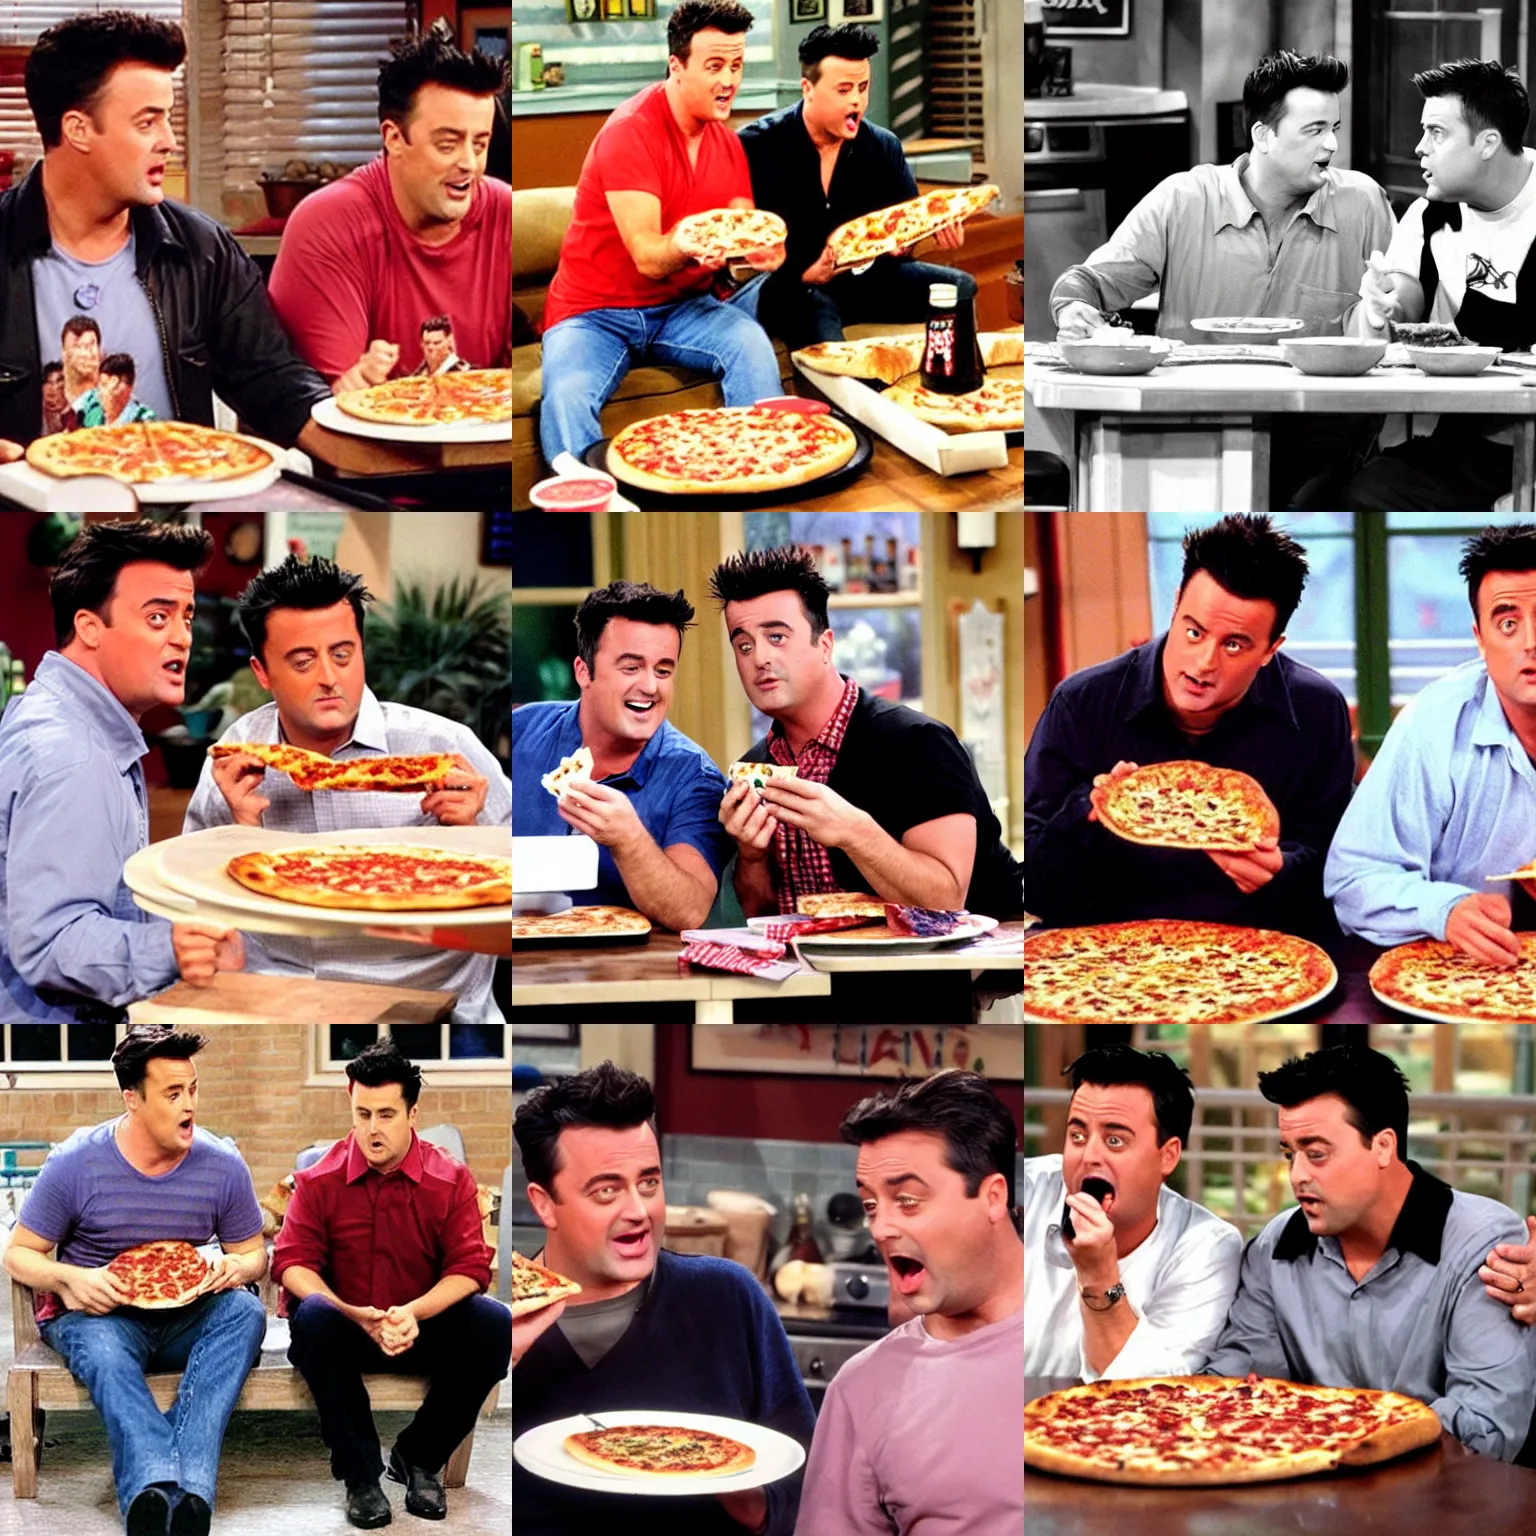 Prompt: chandler bing and joey Tribbiani eating pizza